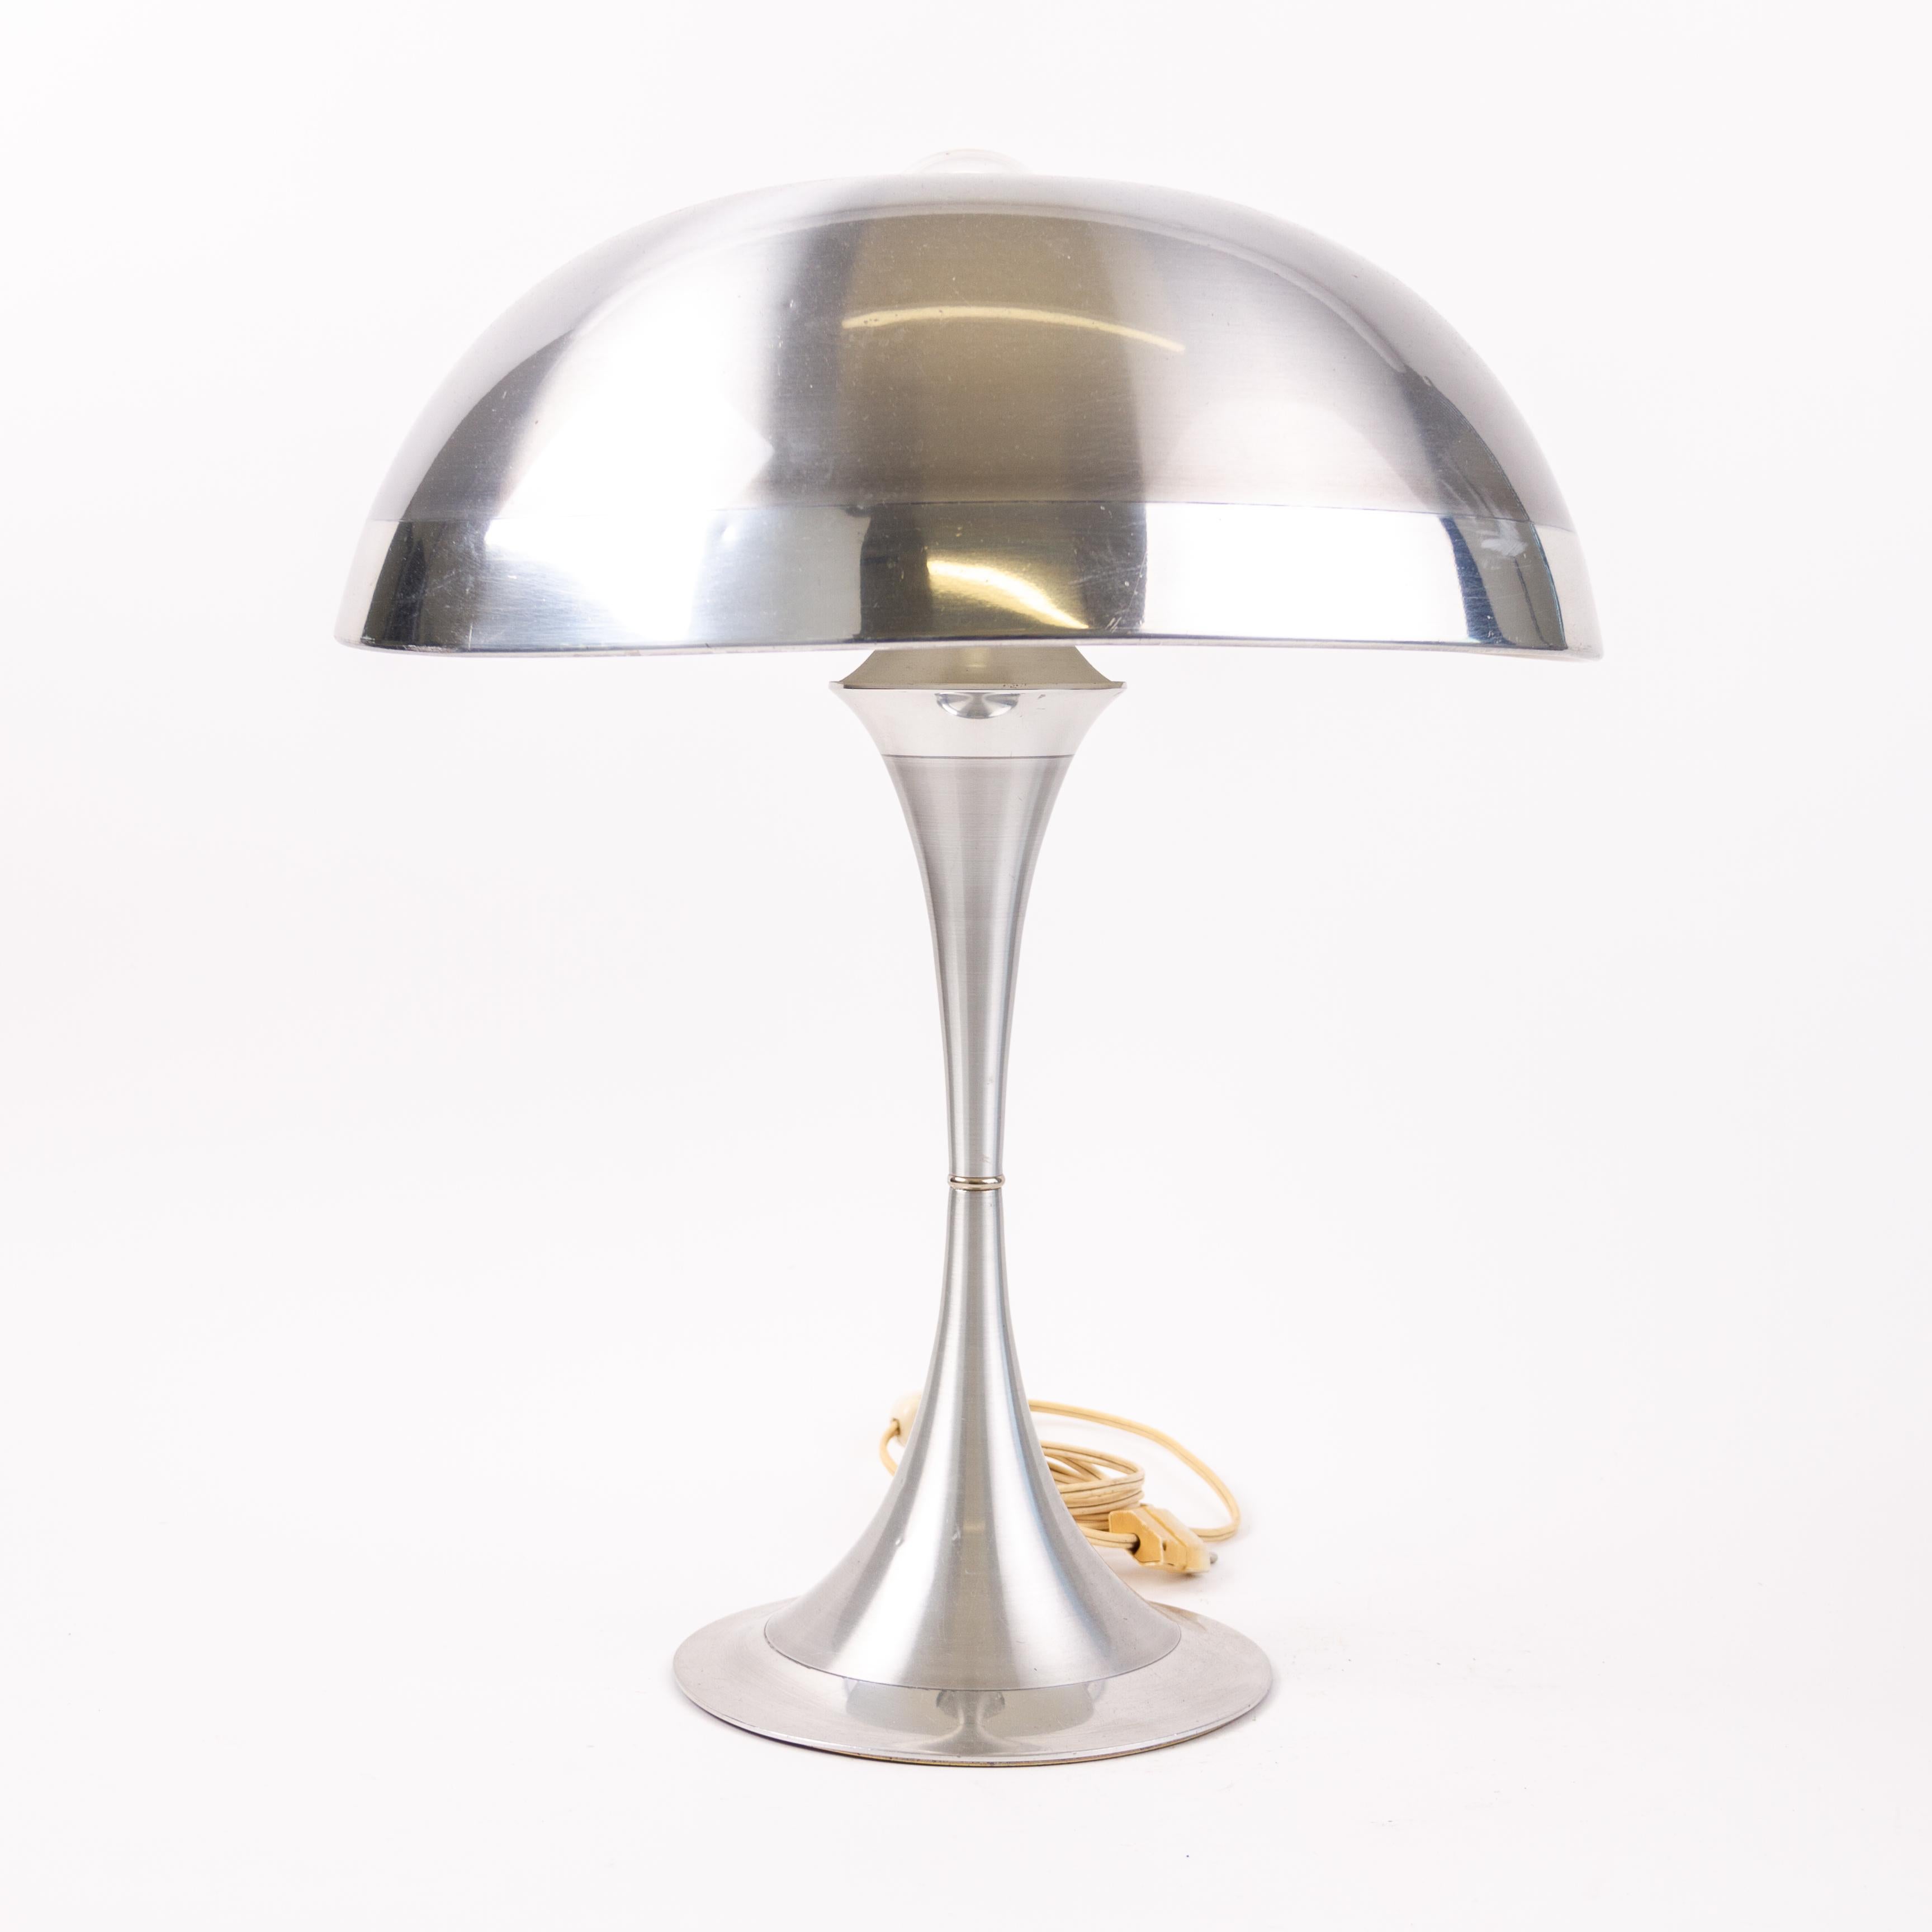 Louis Christiaan Kalff Ultra Modernist Chrome Table Lamp 1960s

Louis Christiaan Kalff (1897–1976) was a Dutch industrial designer and architect. He is best known for his significant contributions to the field of industrial design, particularly in